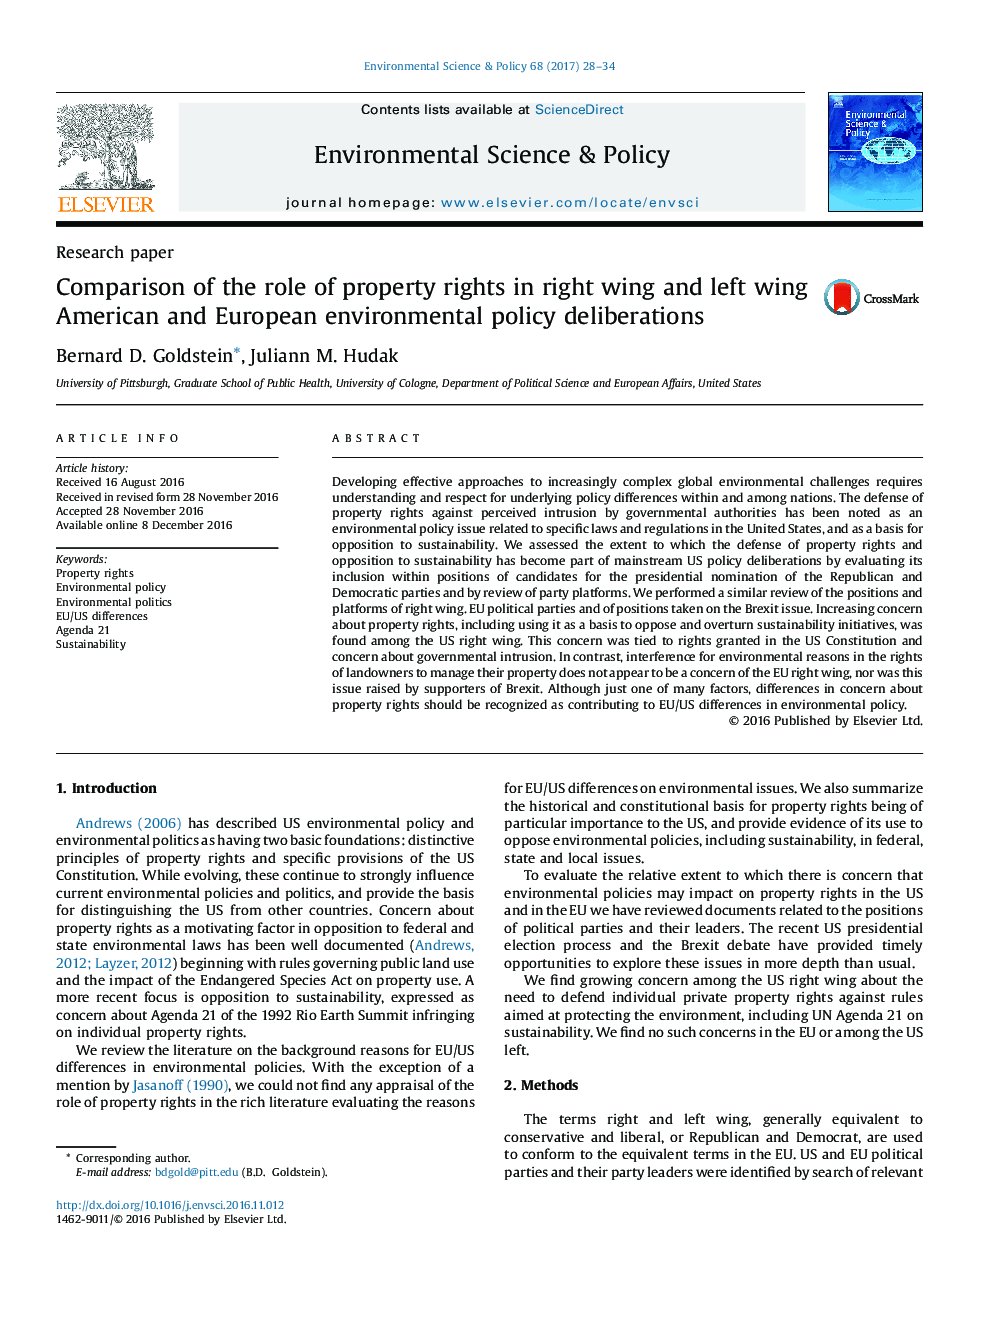 Comparison of the role of property rights in right wing and left wing American and European environmental policy deliberations